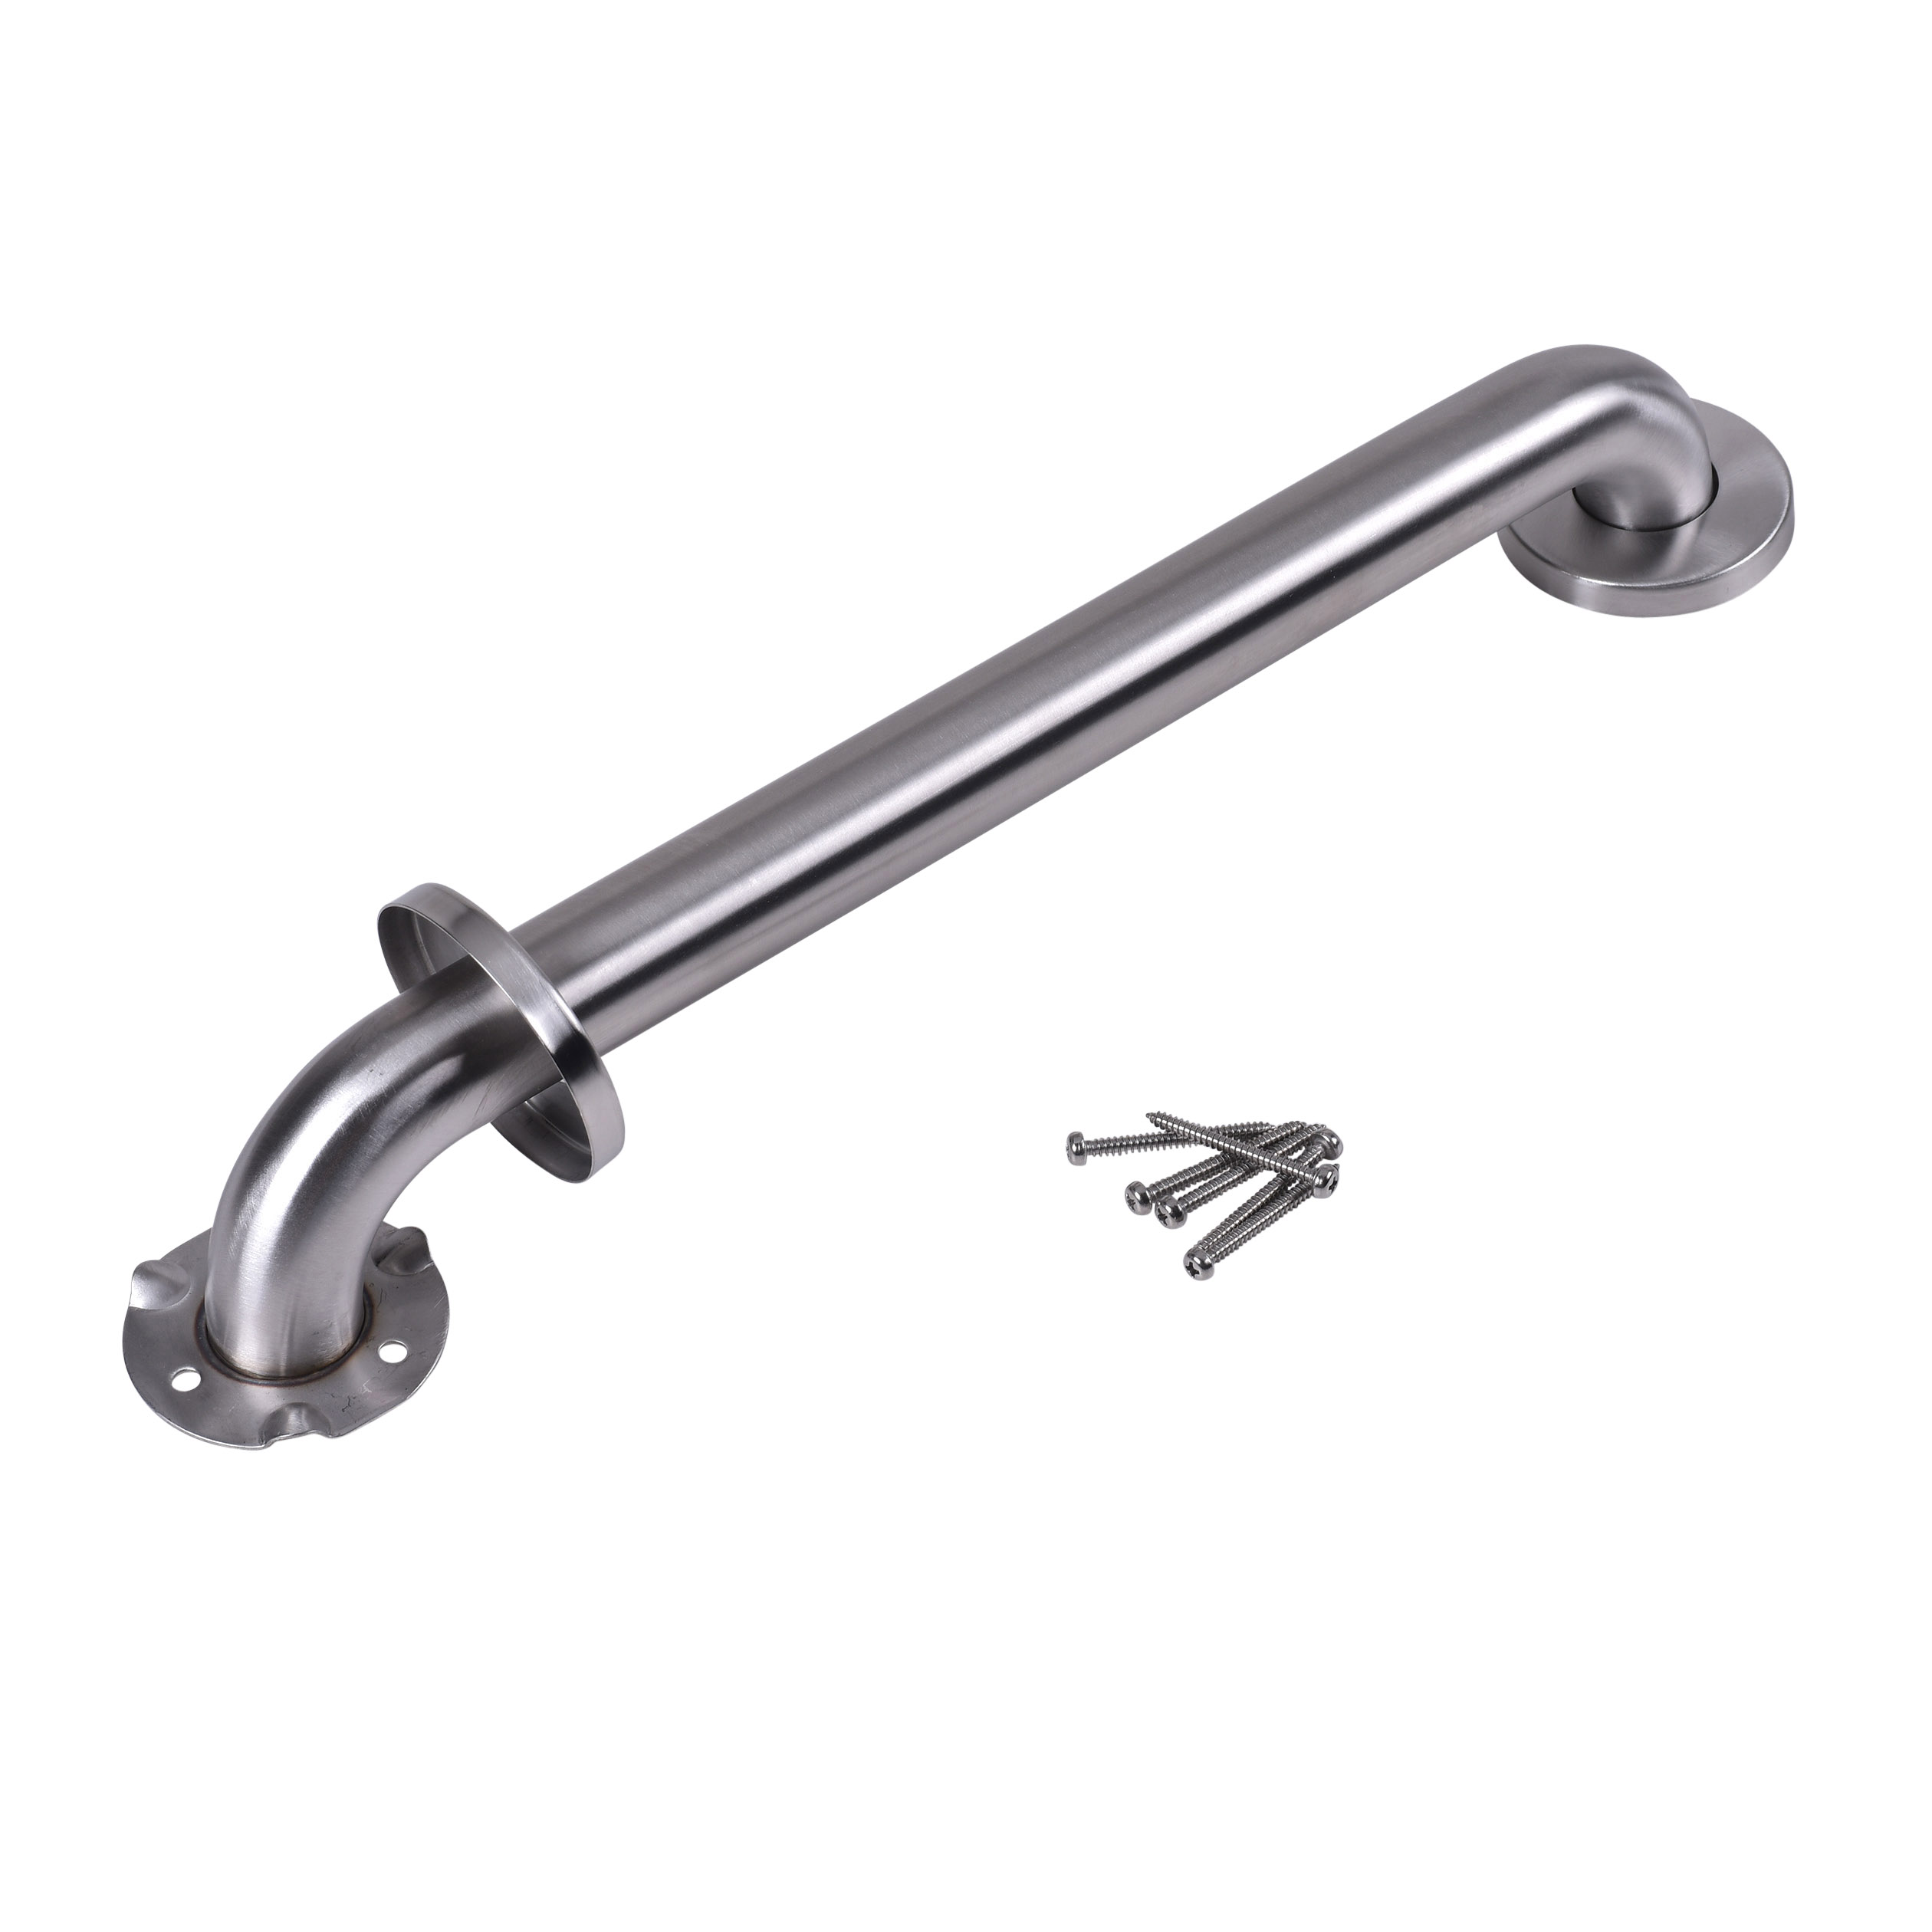 Dearborn Stainless Steel, Grab Bar 1-1/2" X 18" With Concealed Flange 412116